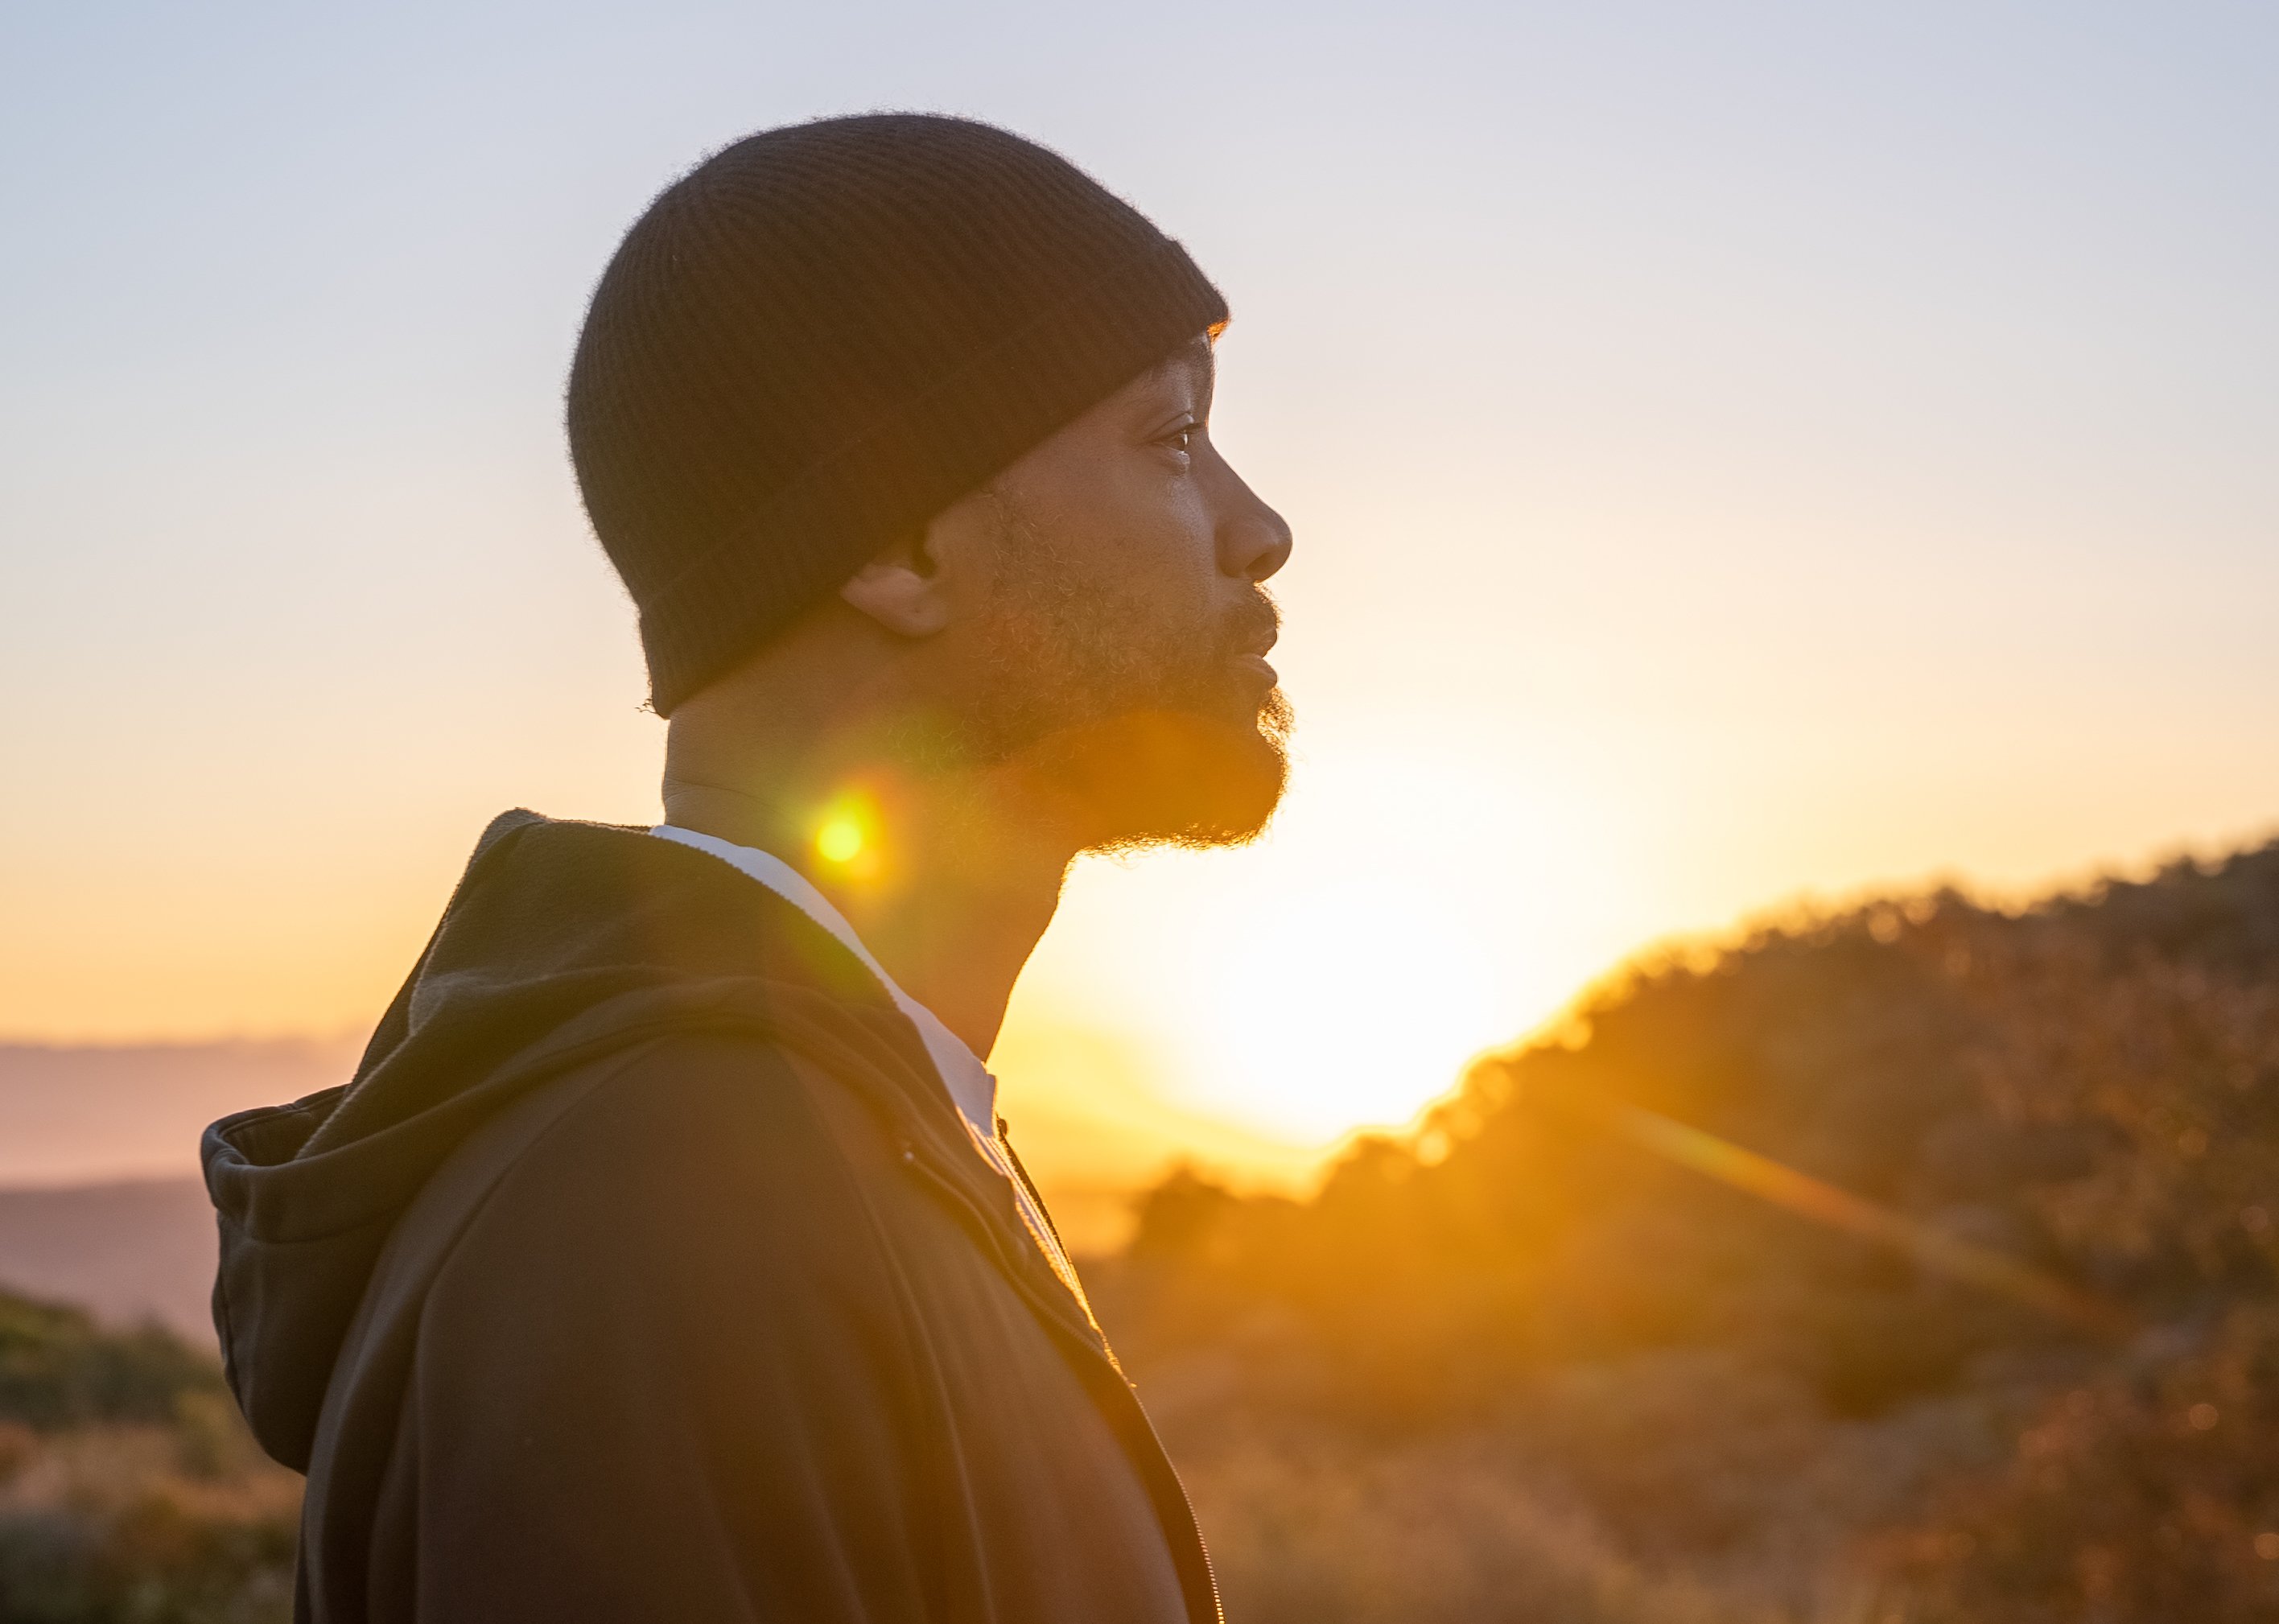 Will Smith looks over the sunrise